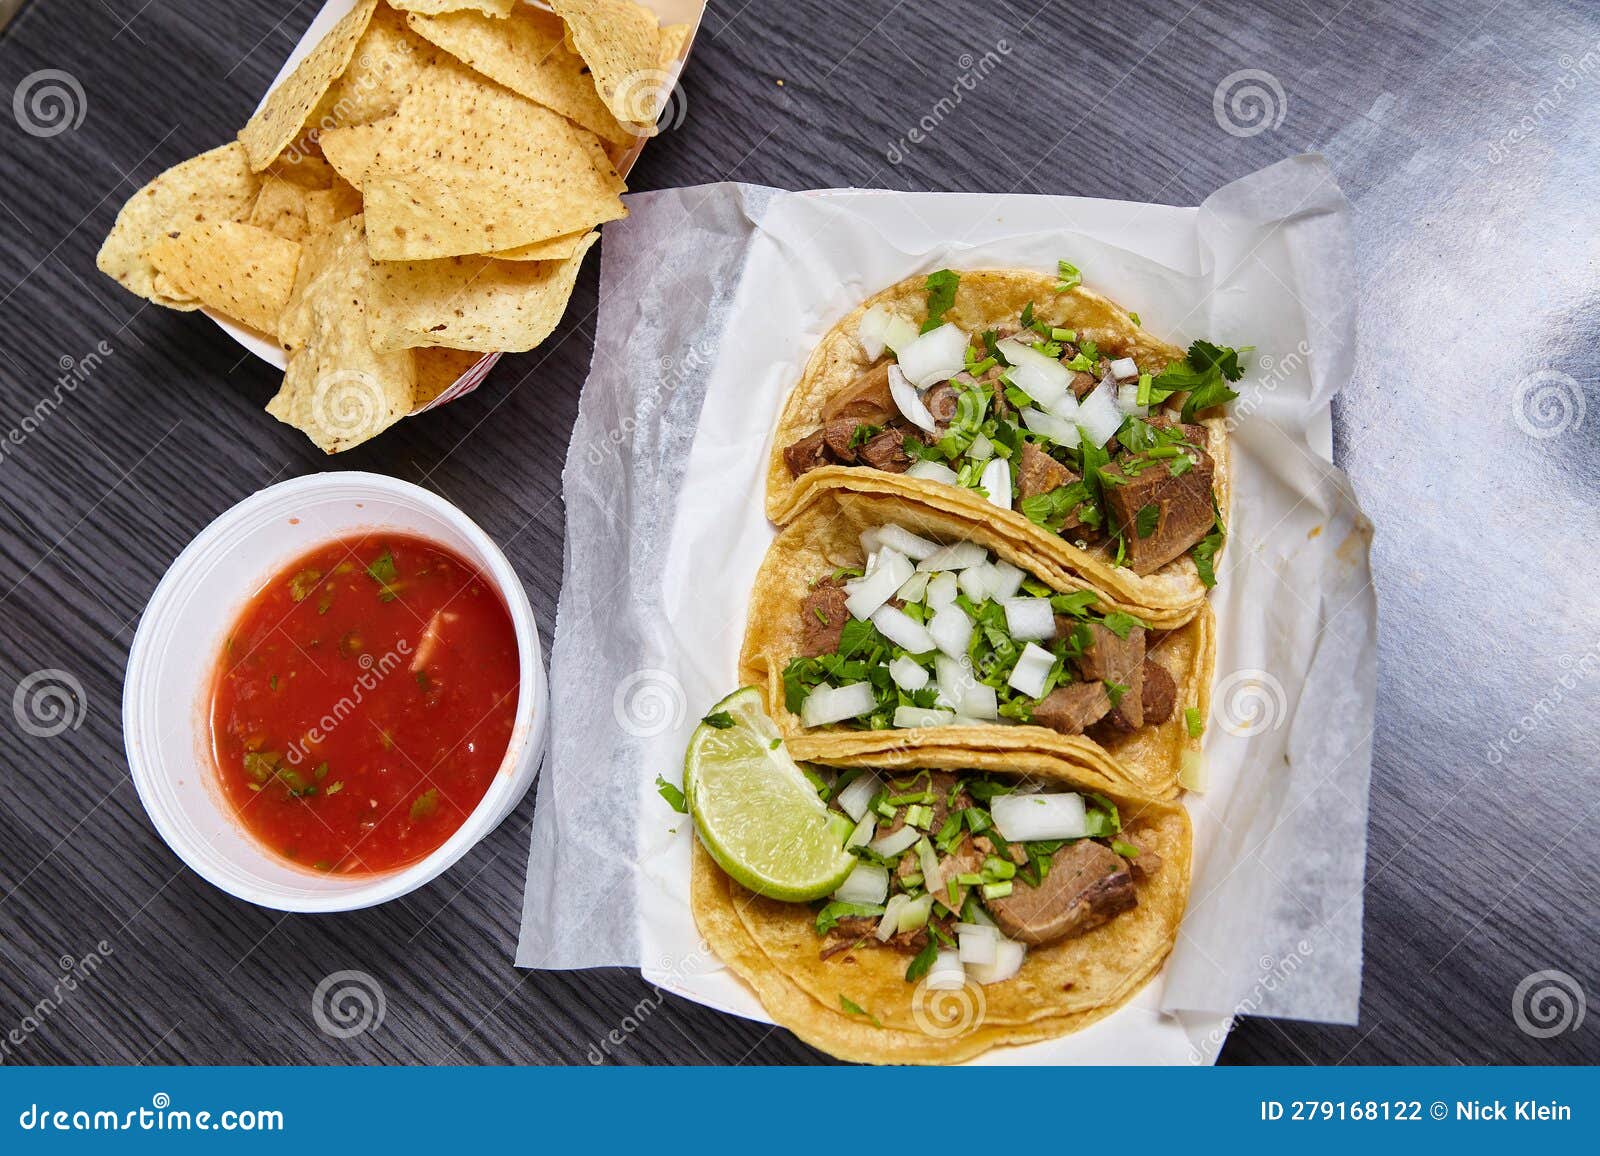 meal 3 corn tortilla lengua cow beef tongue street tacos mexican with chips red salsa